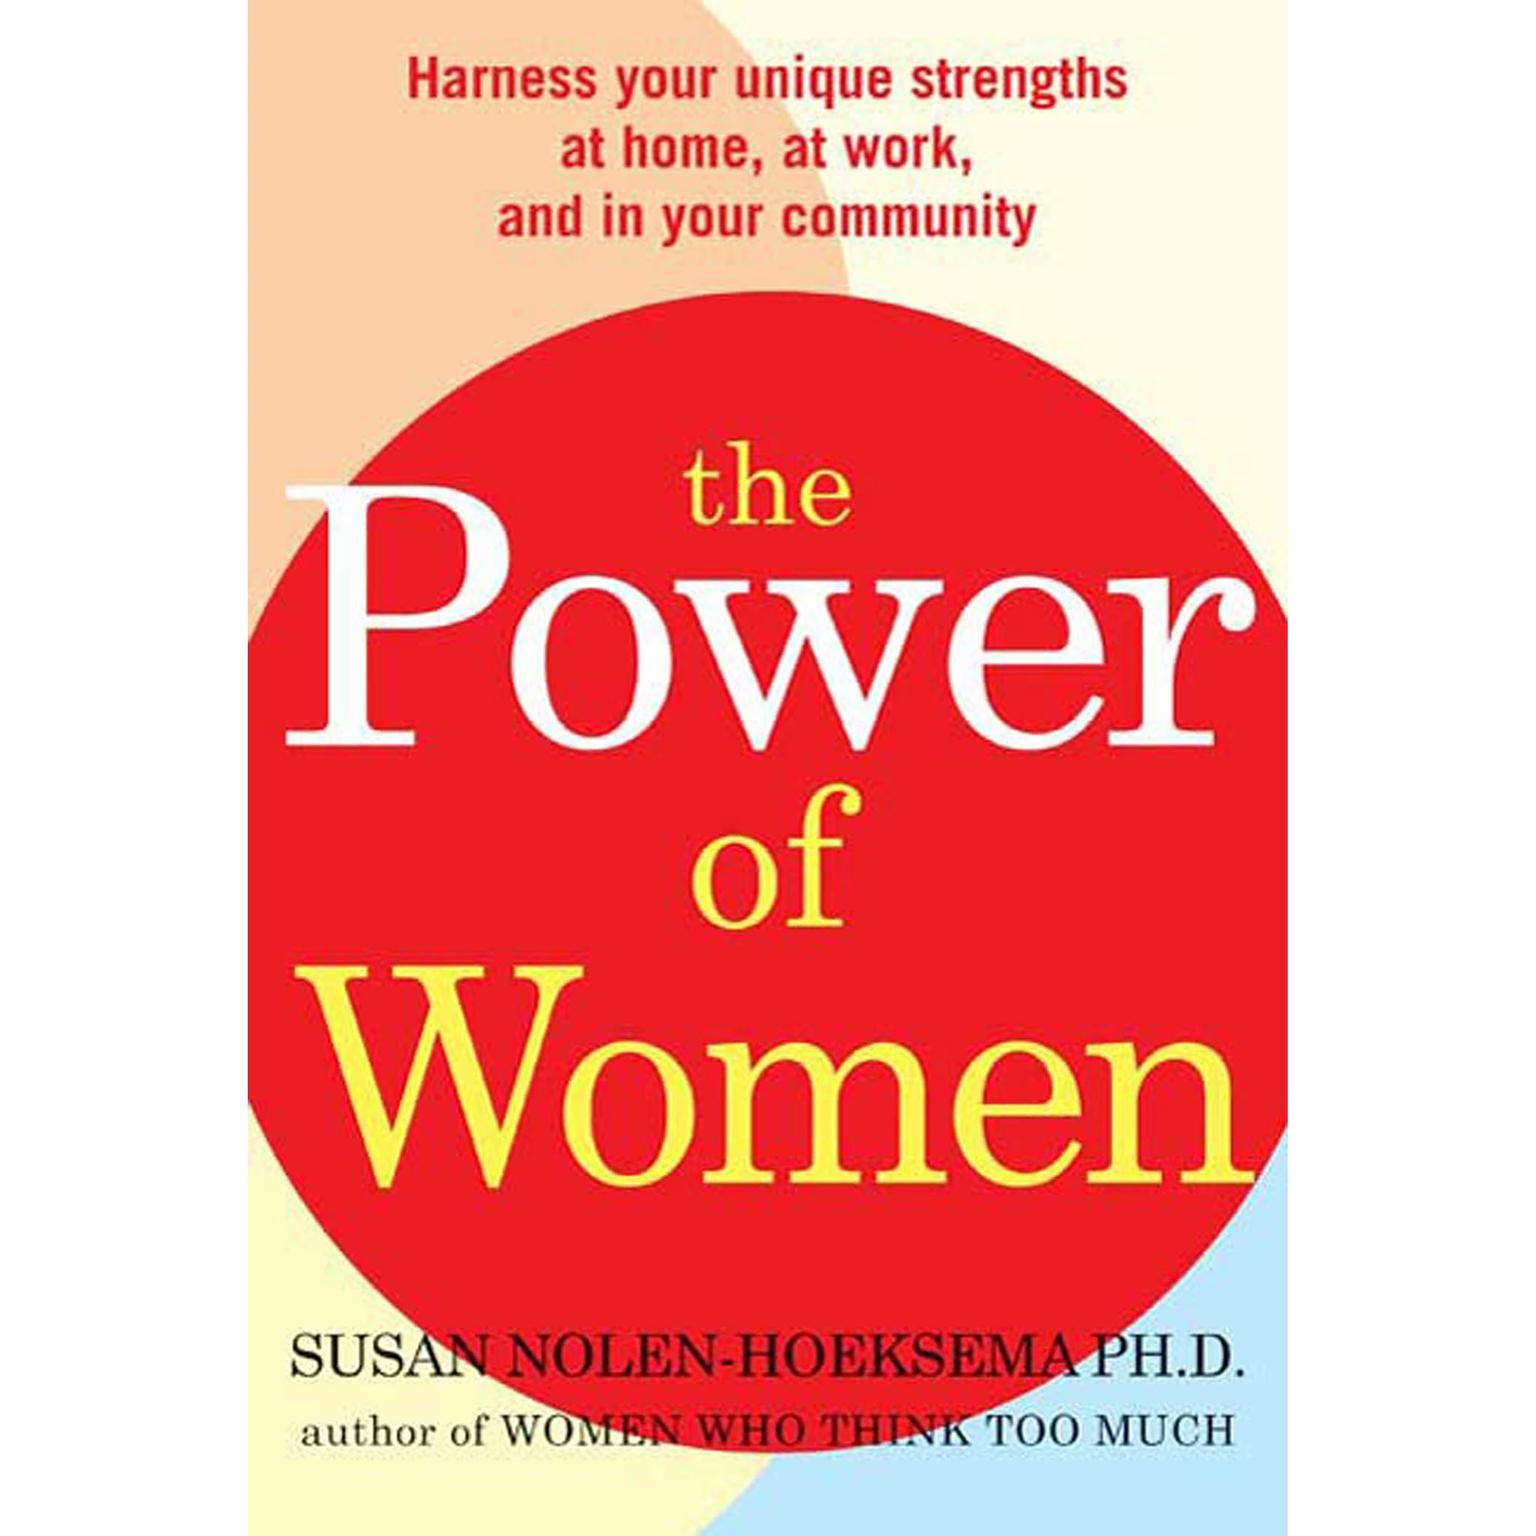 The Power of Women (Abridged): Harness Your Unique Strengths at Home, at Work, and in Your Community Audiobook, by Susan Nolen-Hoeksema